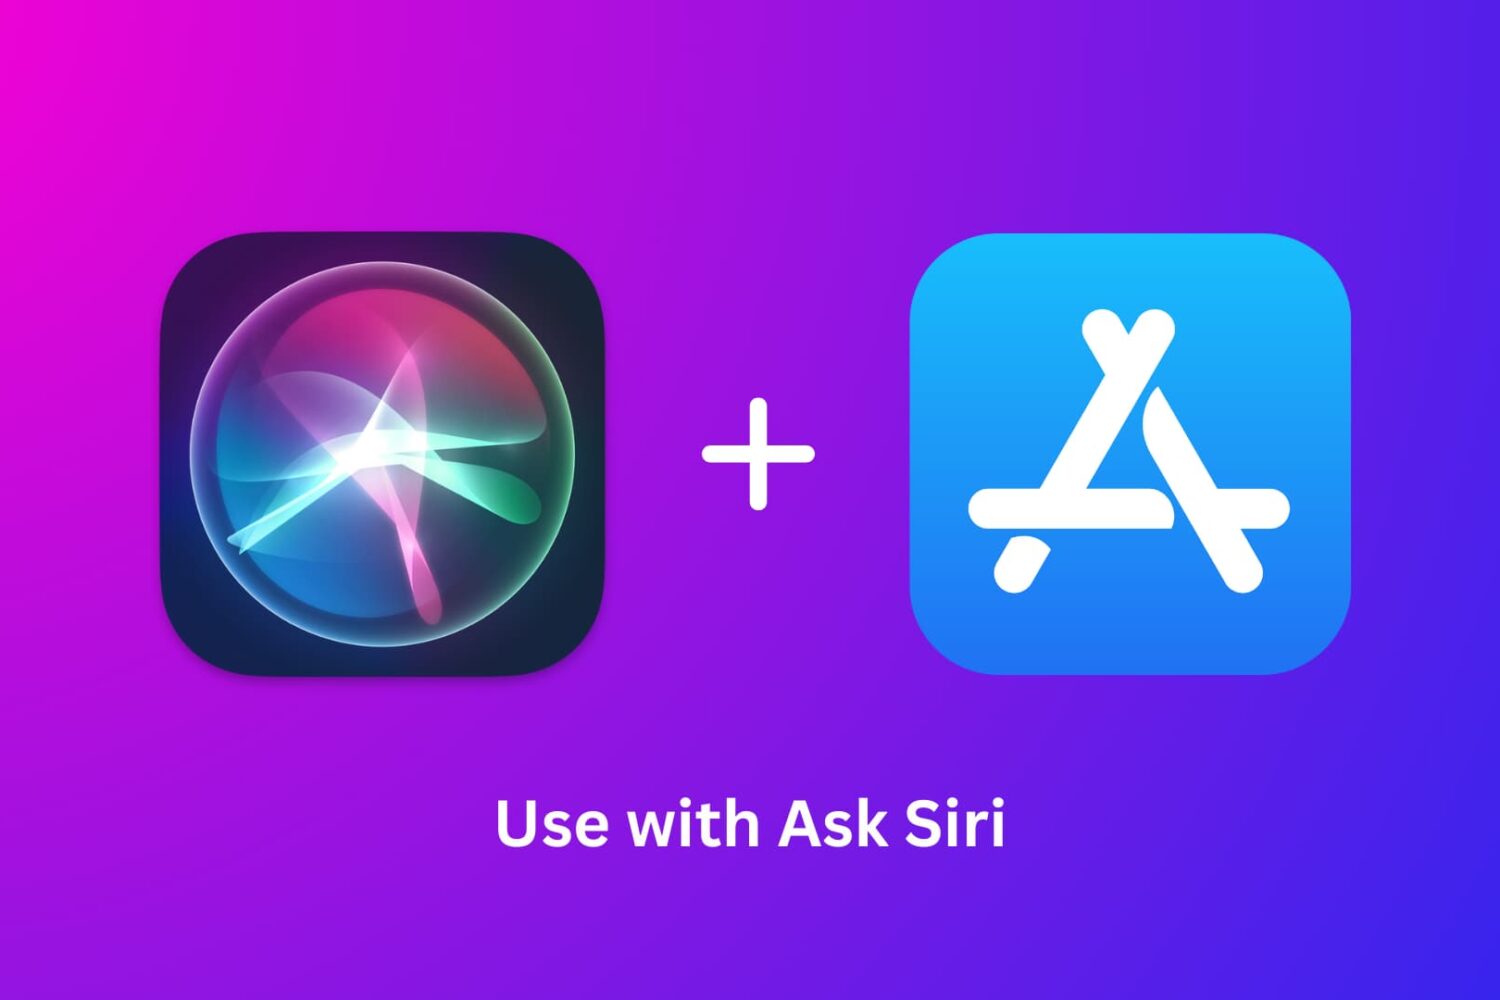 Siri and App Store icons to illustrate "Use with Ask Siri" feature